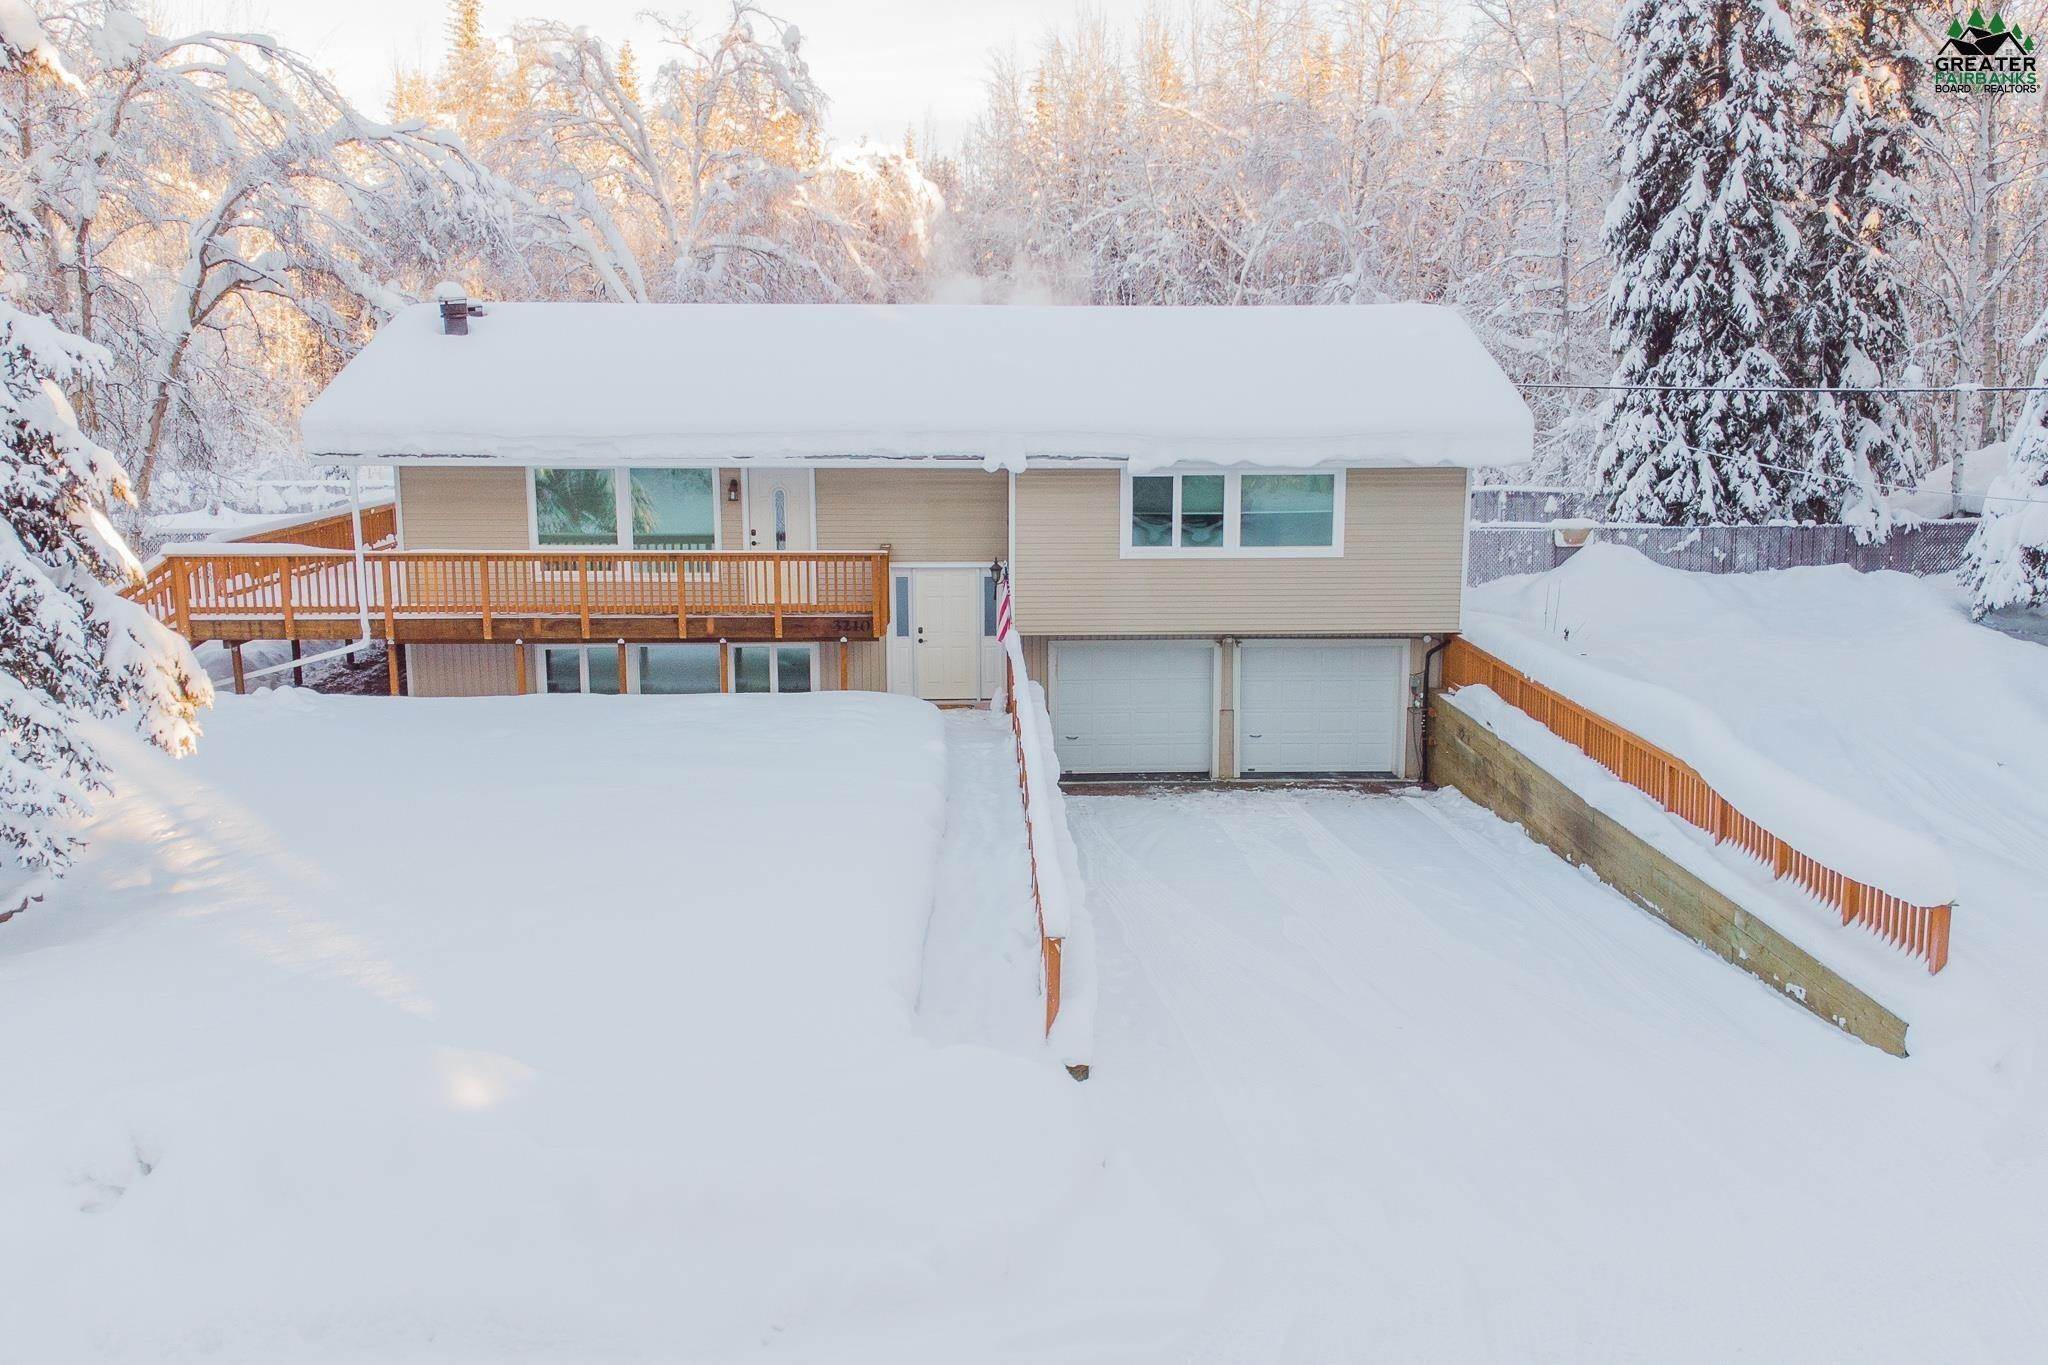 Single Family for Sale at North Pole, AK 99705